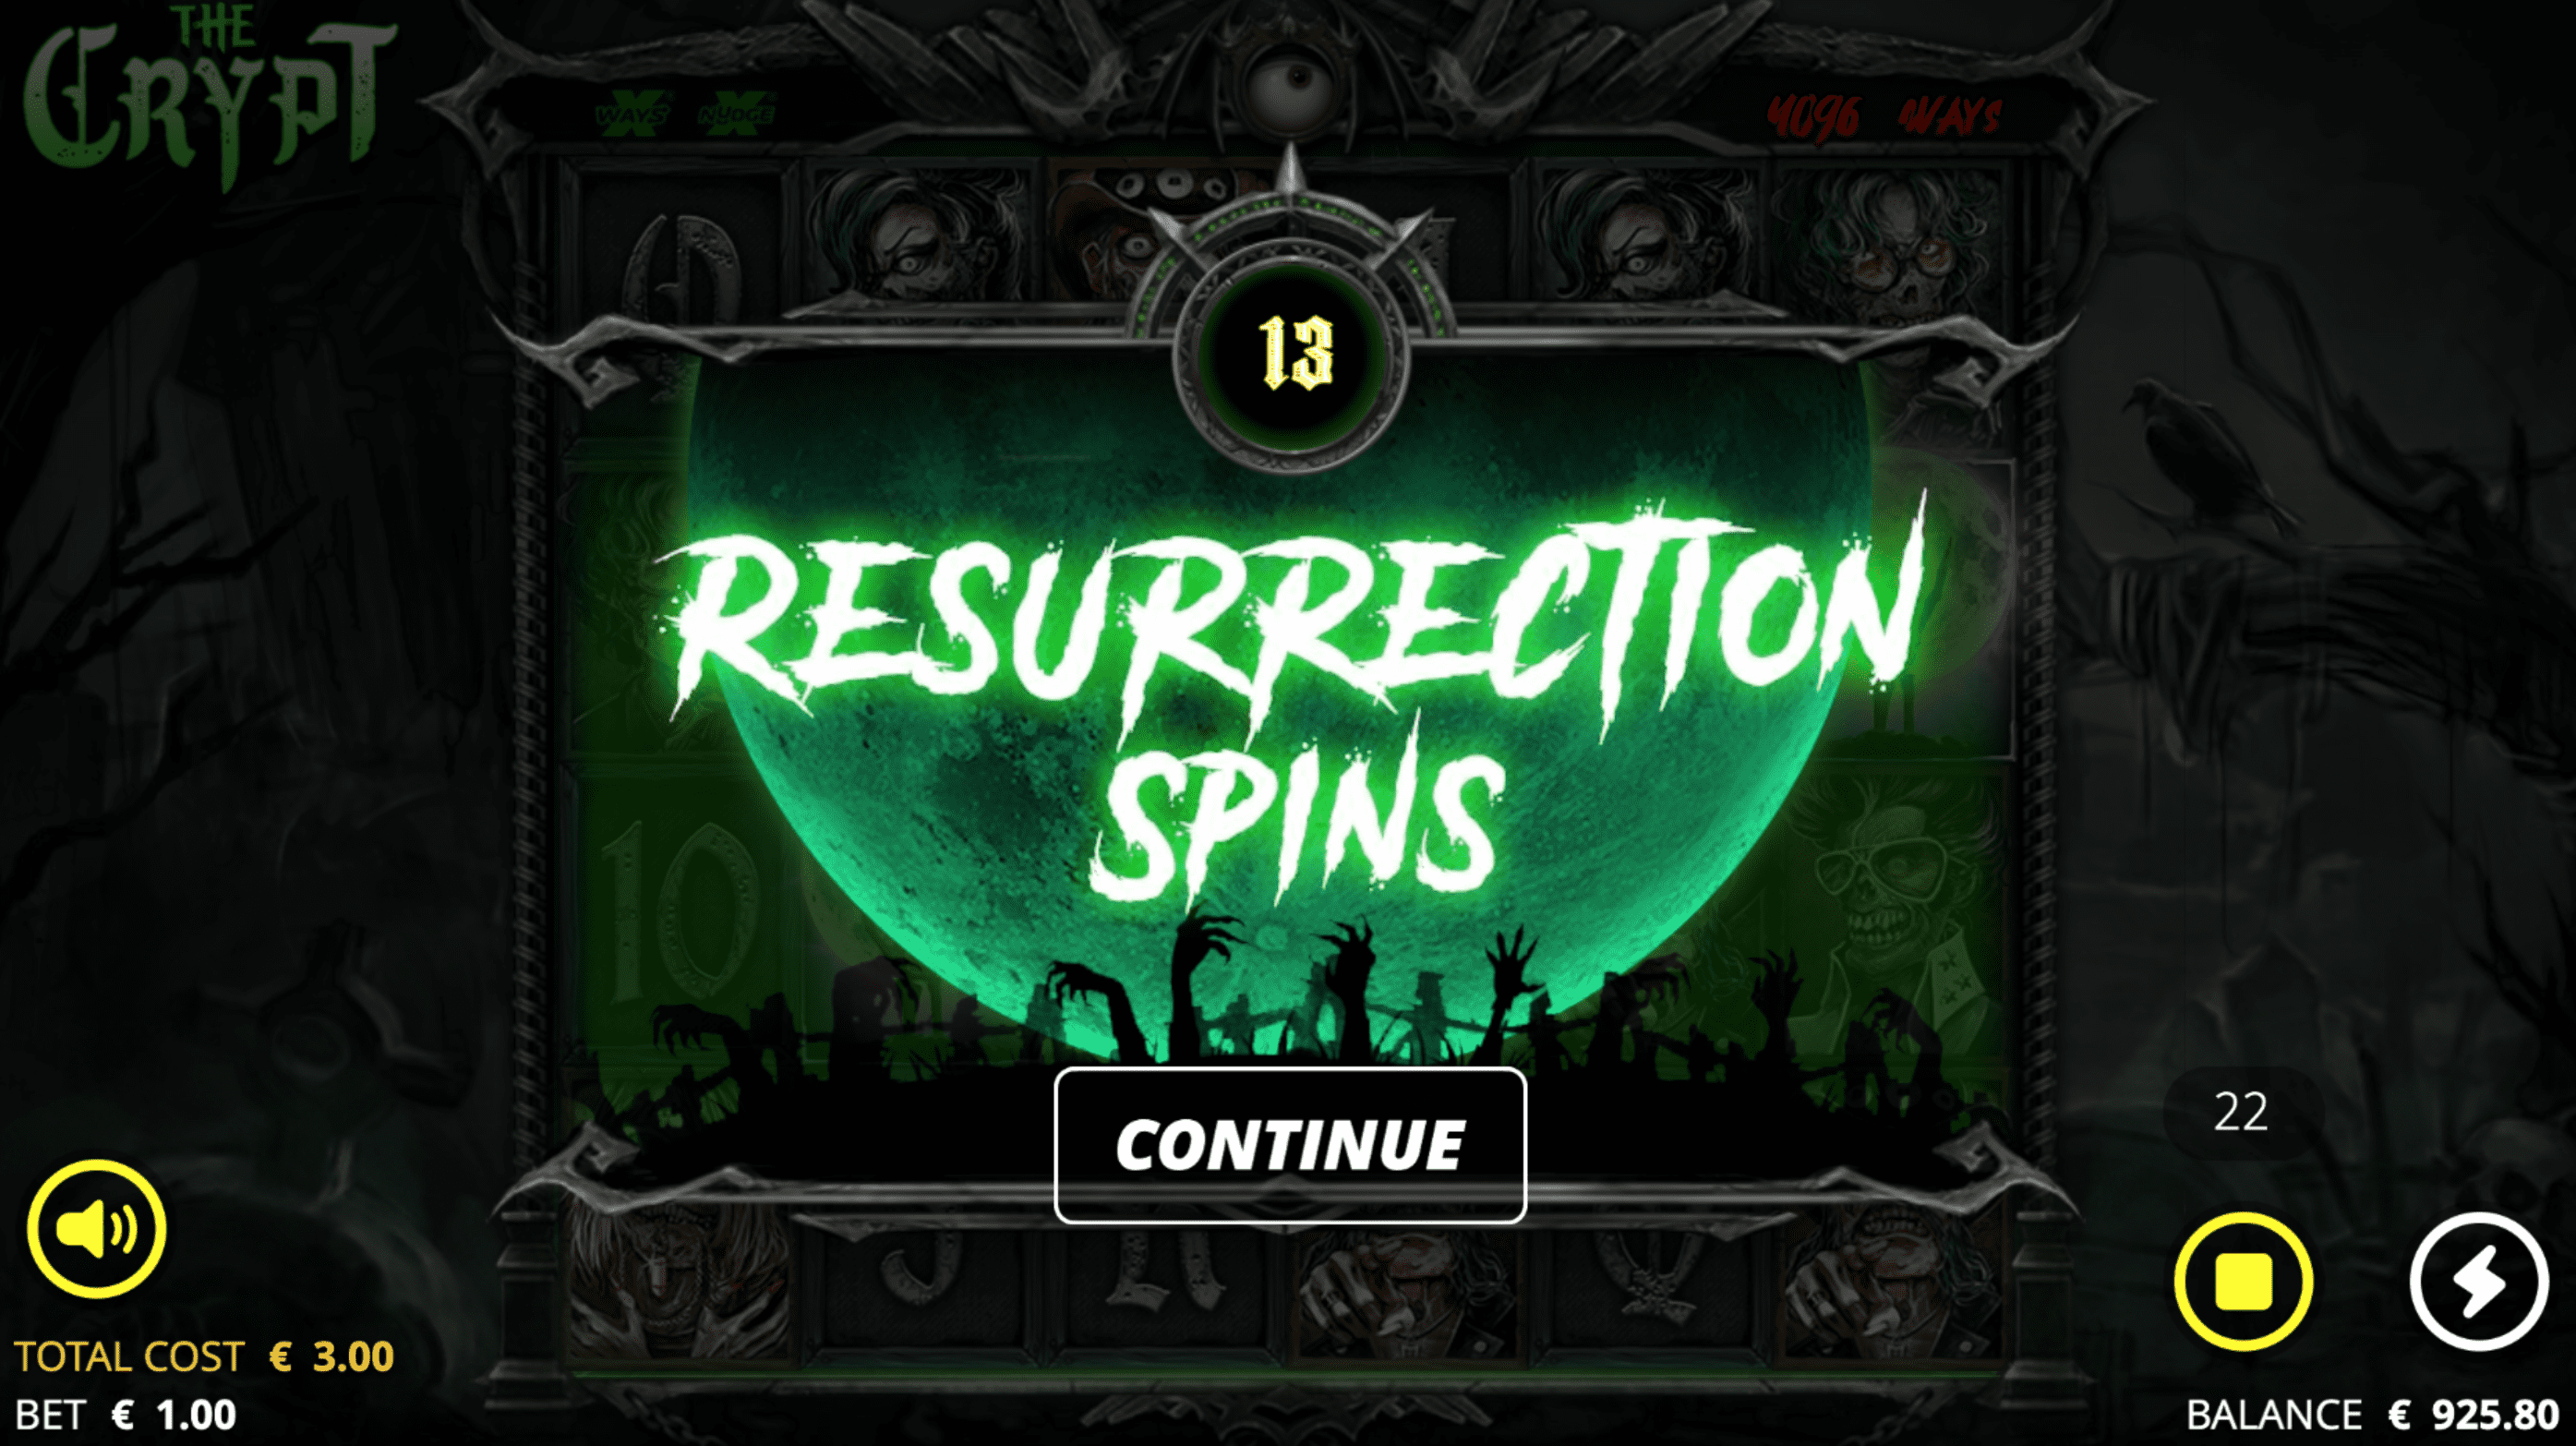 The Crypt Slot - Resurrection Spins